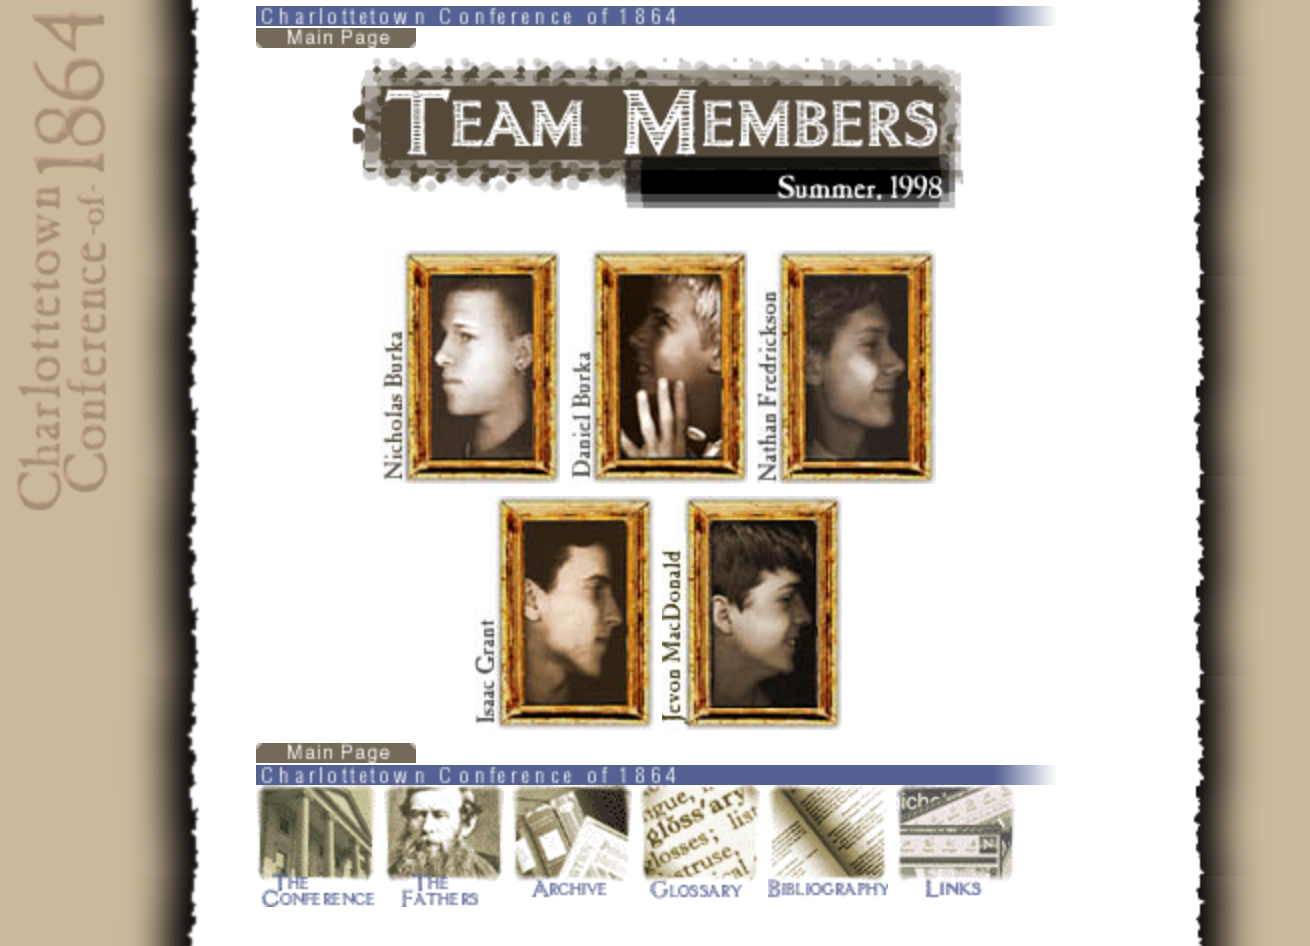 Screenshot Charlottetown Conference website Team Members page with scanned faces